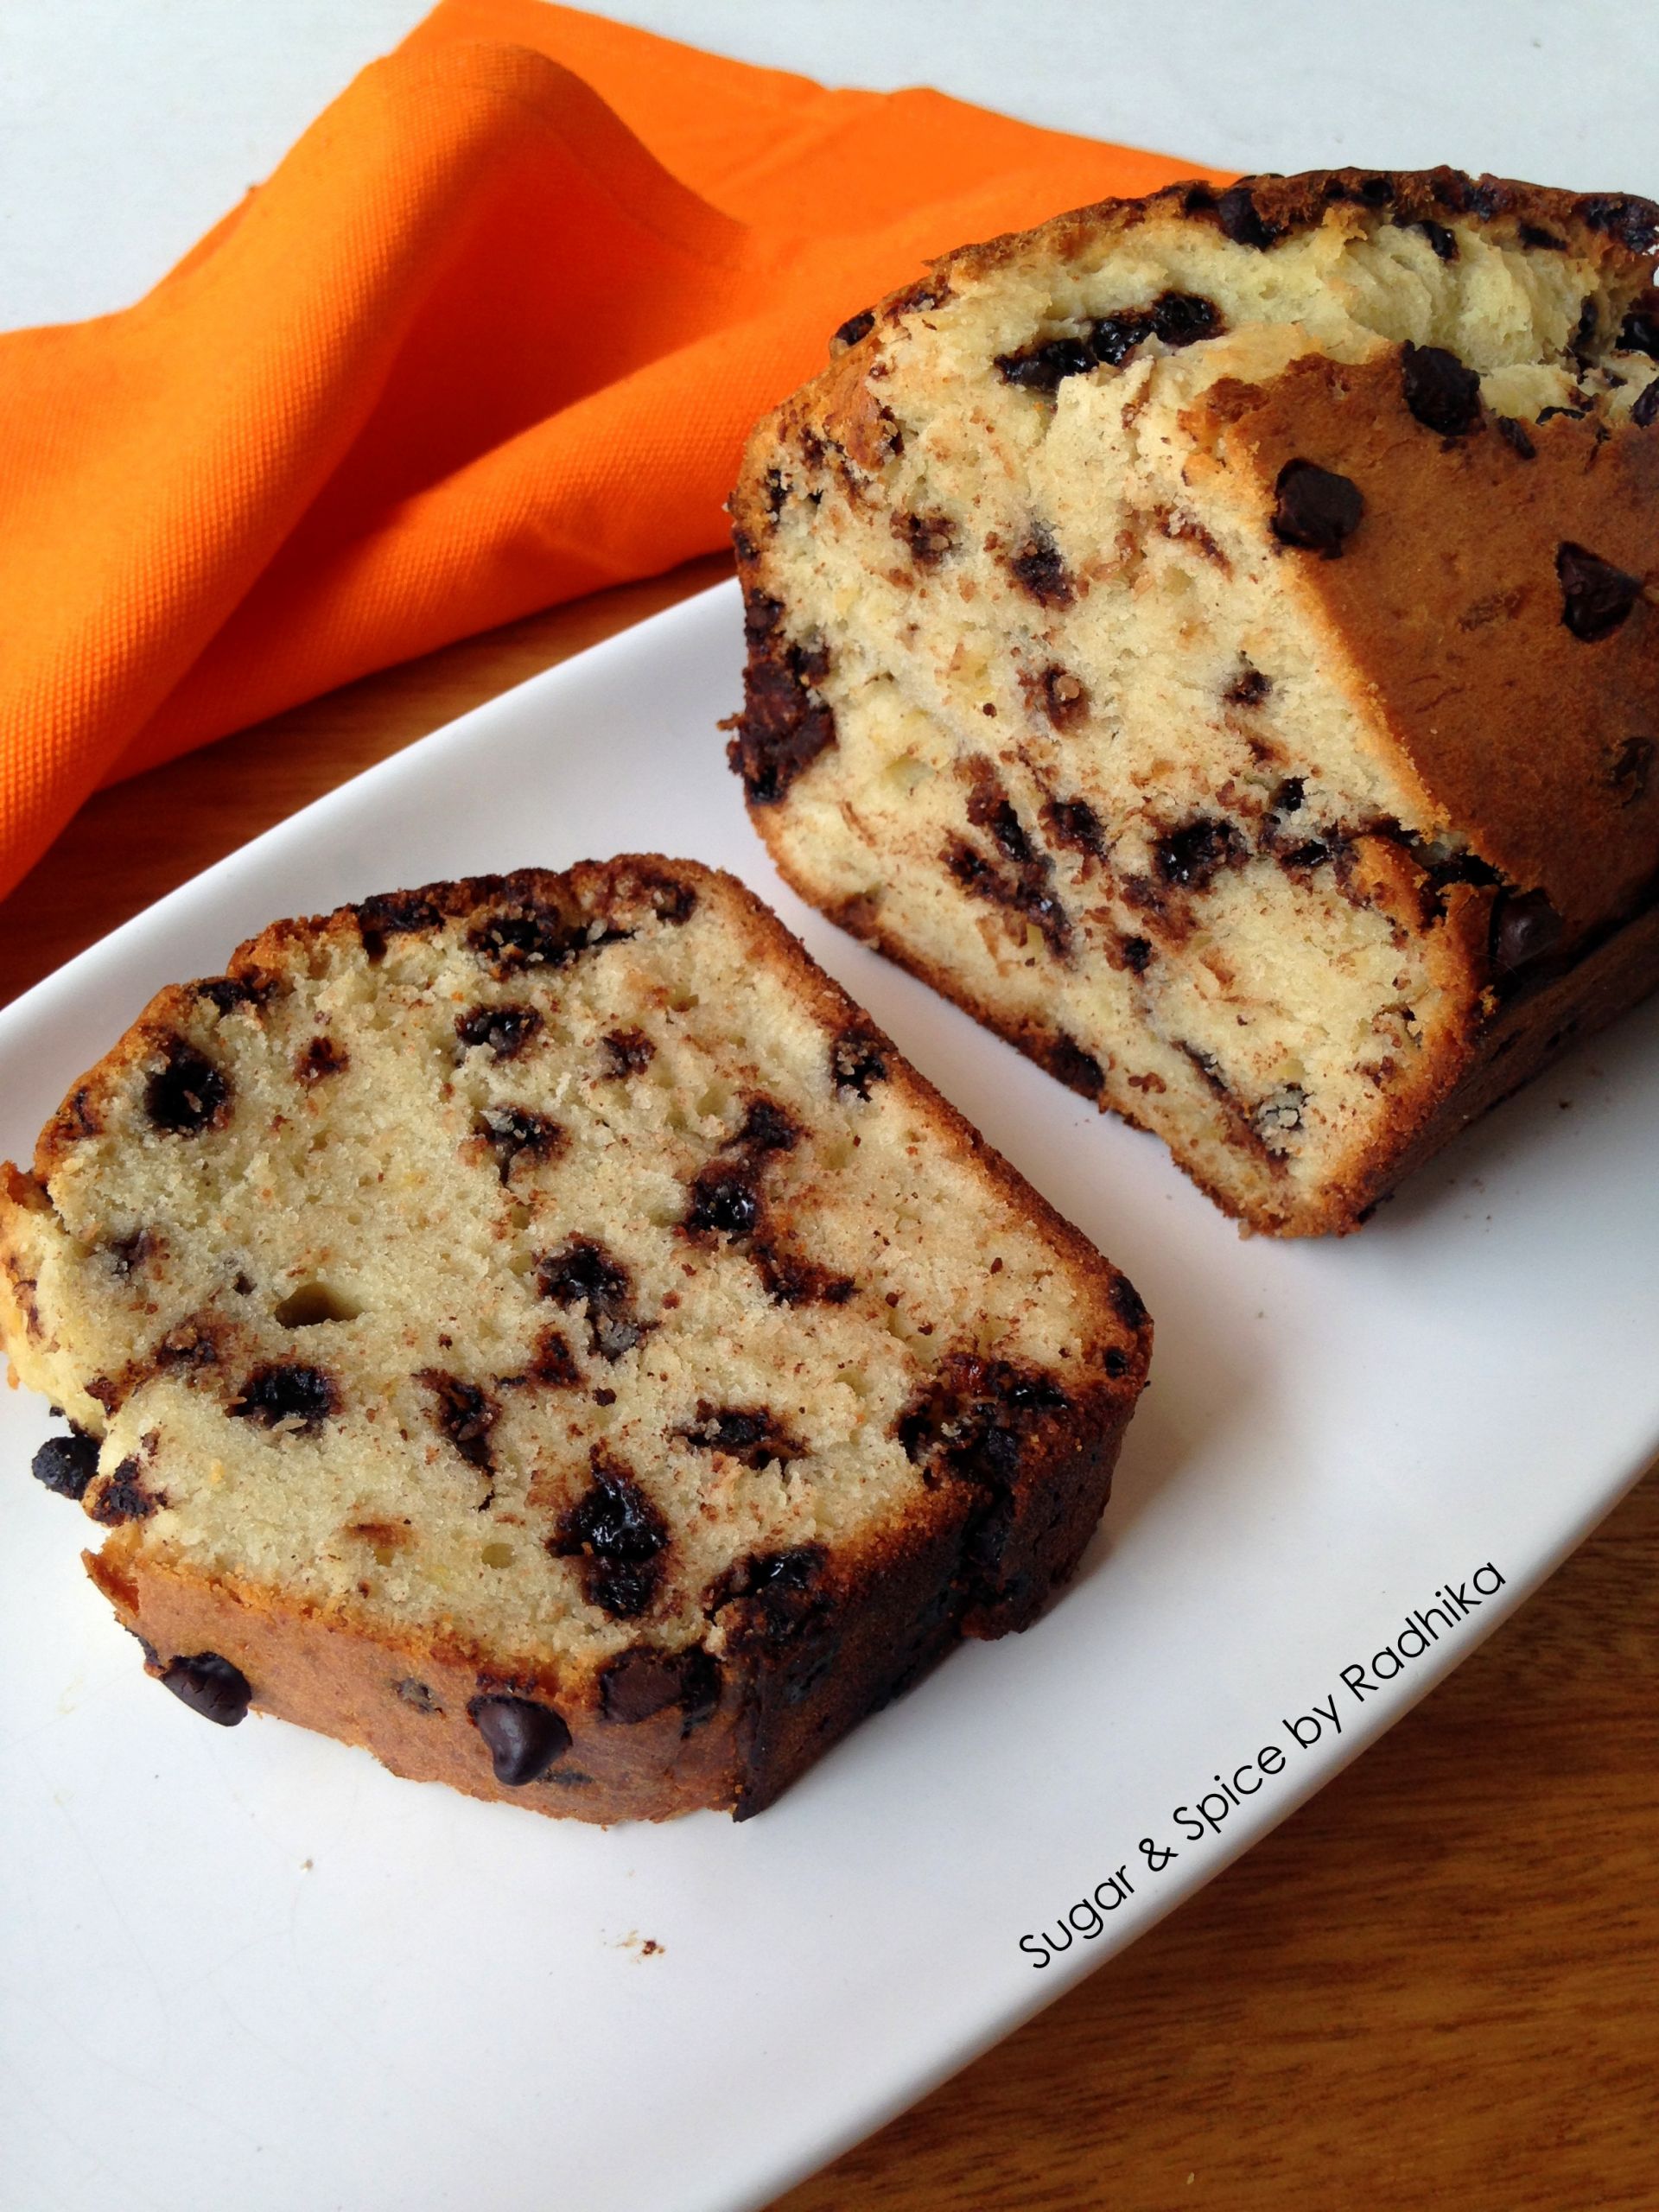 Best Chocolate Chip Banana Bread
 The Best Chocolate Chip Banana Bread